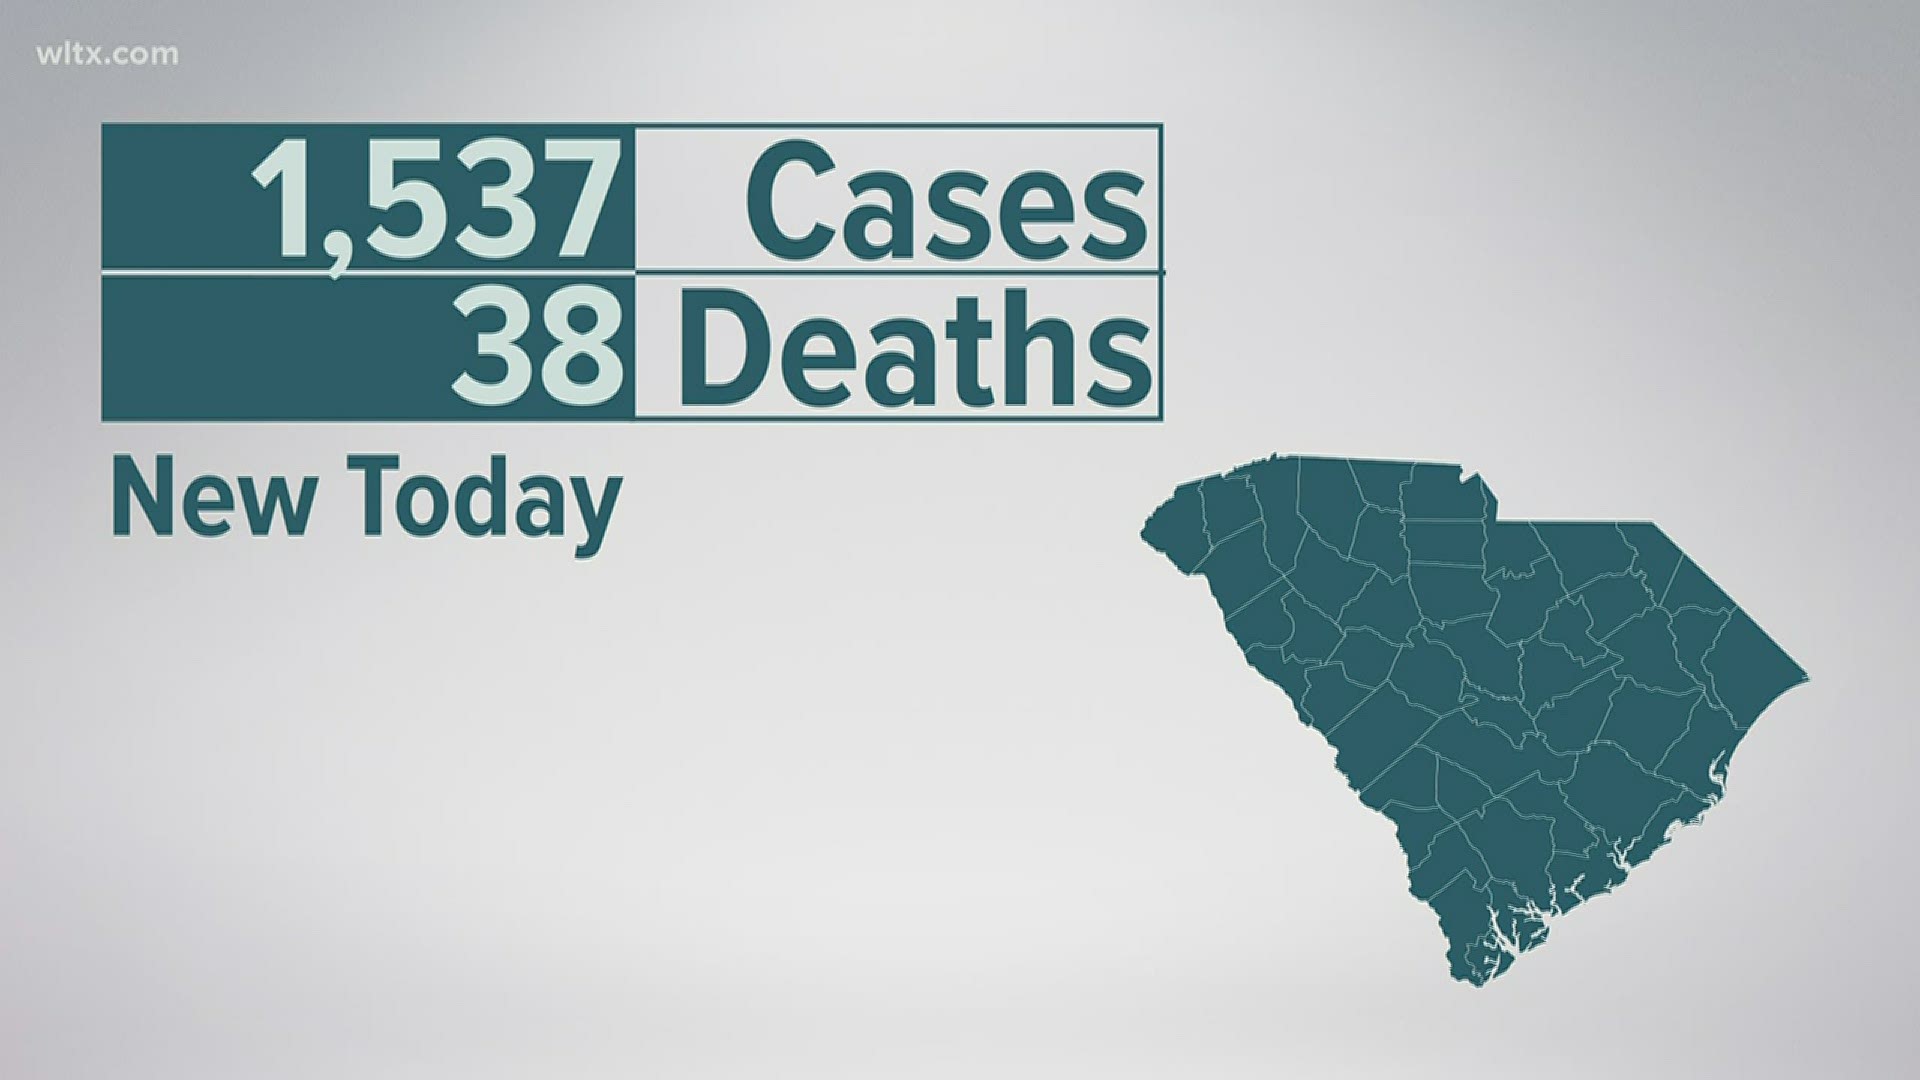 The state's health agency said the record number of deaths is due to some unreported deaths now just coming in.